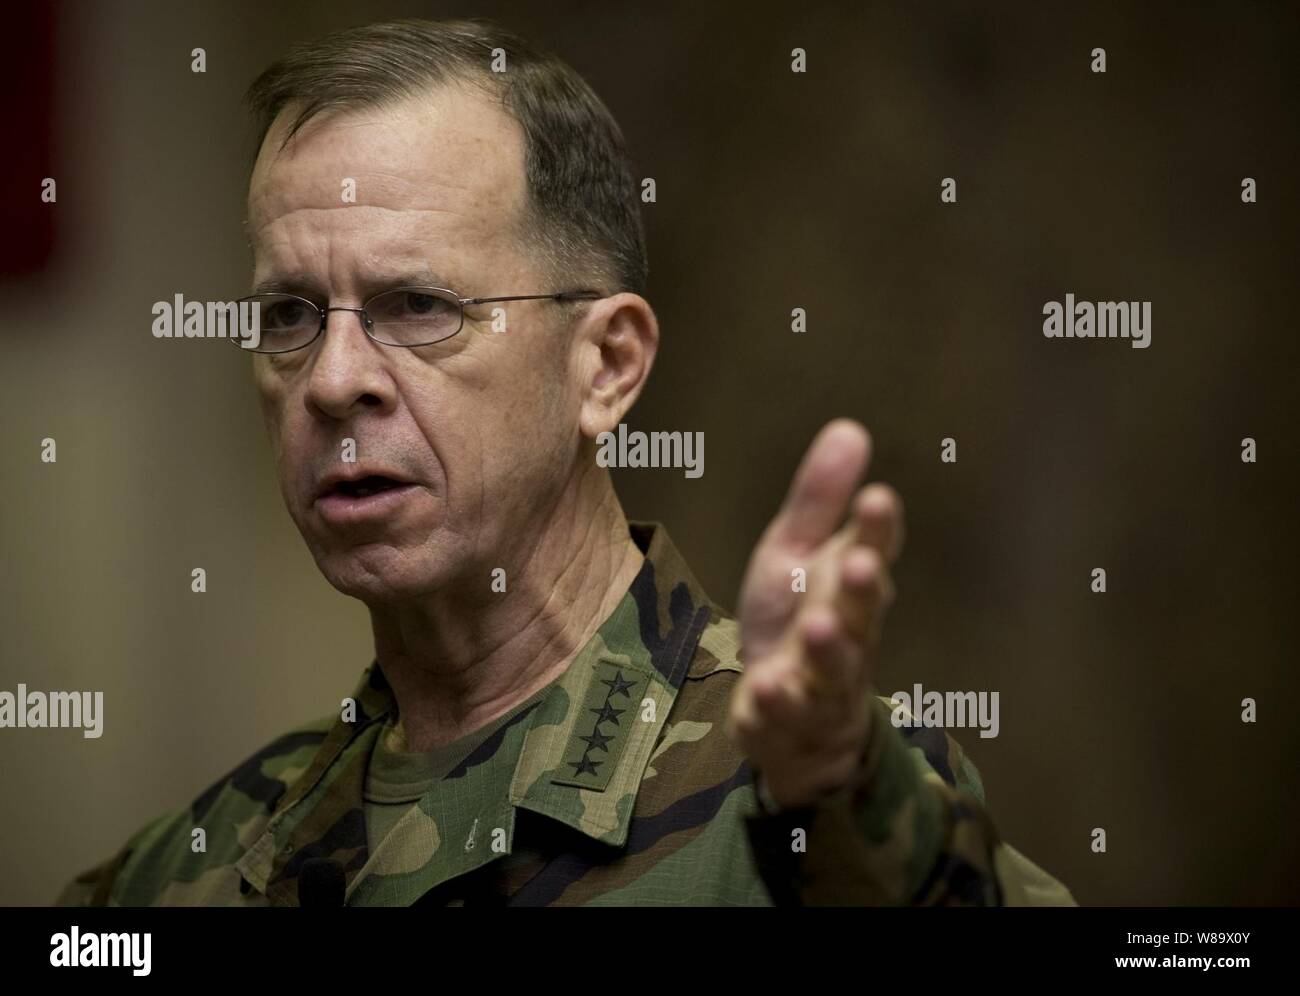 Chairman of the Joint Chiefs of Staff Adm. Mike Mullen, U.S. Navy, addresses service members assigned to the U.S. Special Operations Command at MacDill Air Force Base in Tampa, Fla., on Oct. 31, 2008. Stock Photo